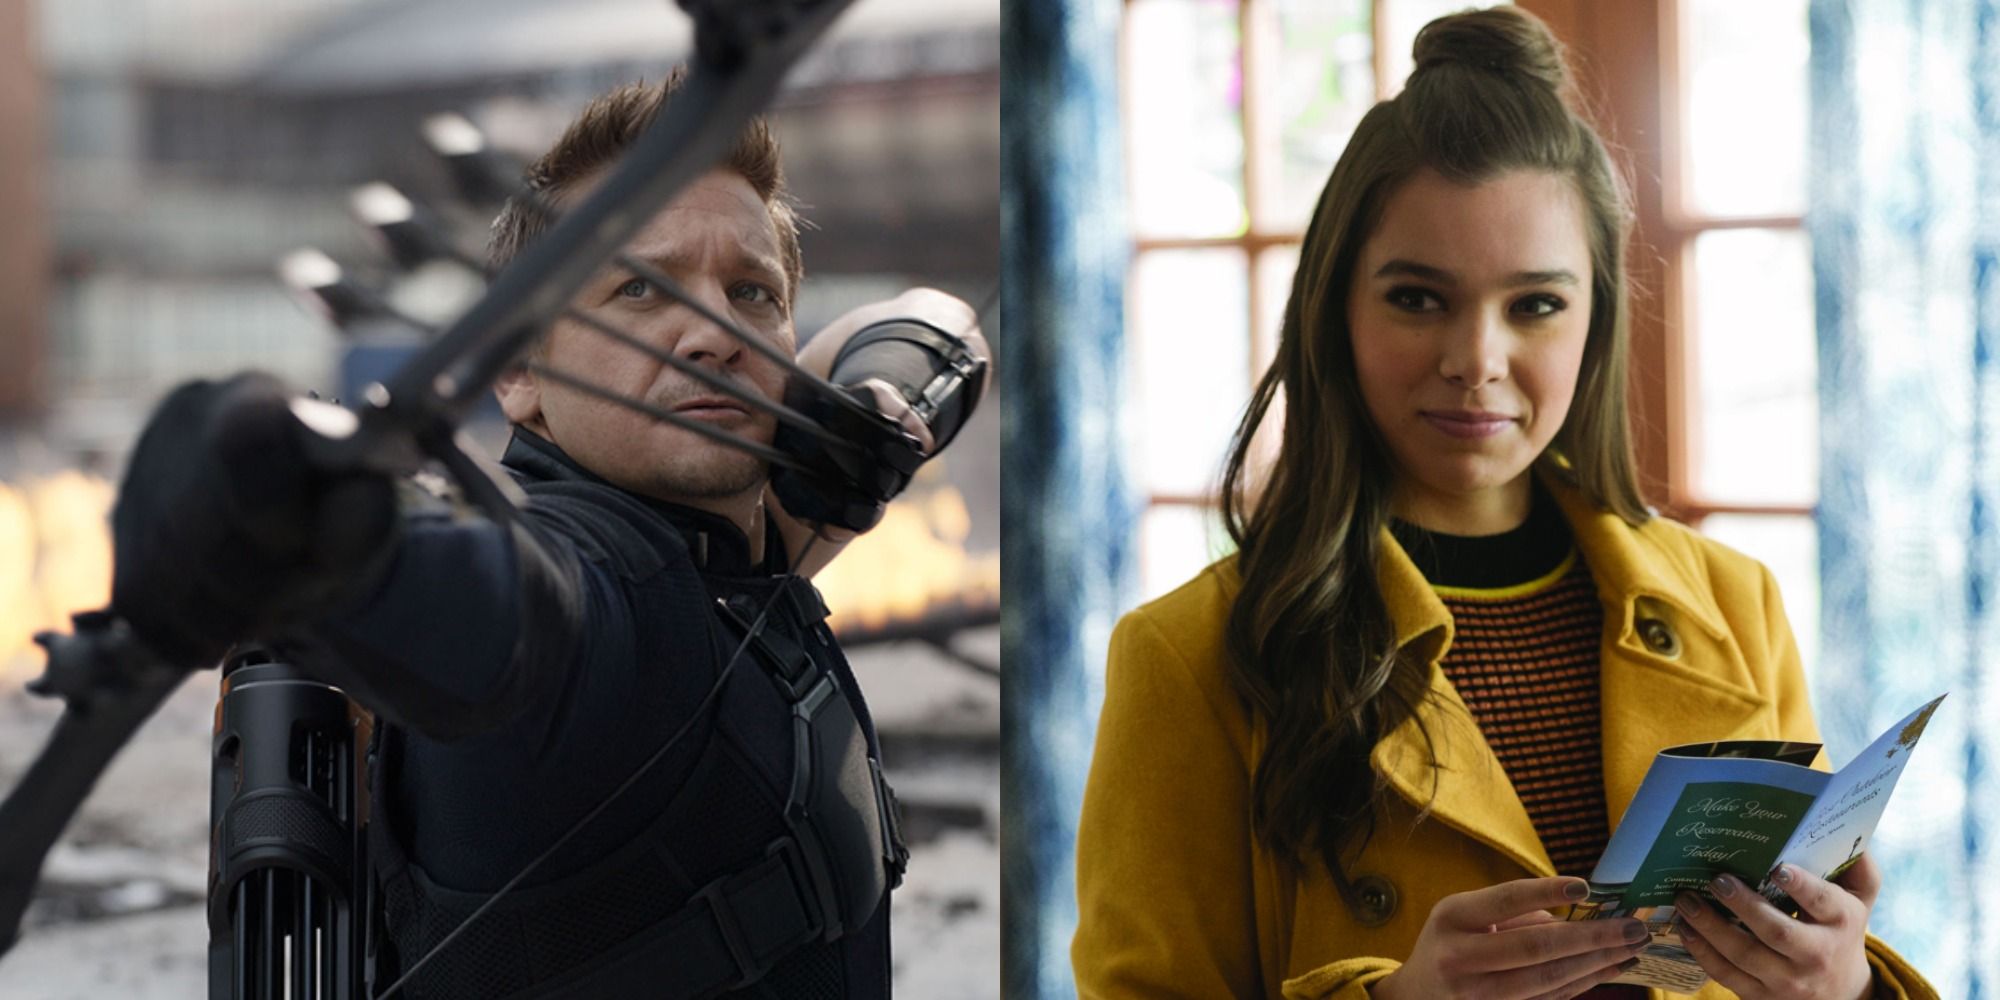 An image of Jeremy Renner in the Avengers and Hailee Steinfeld in Pitch Perfect